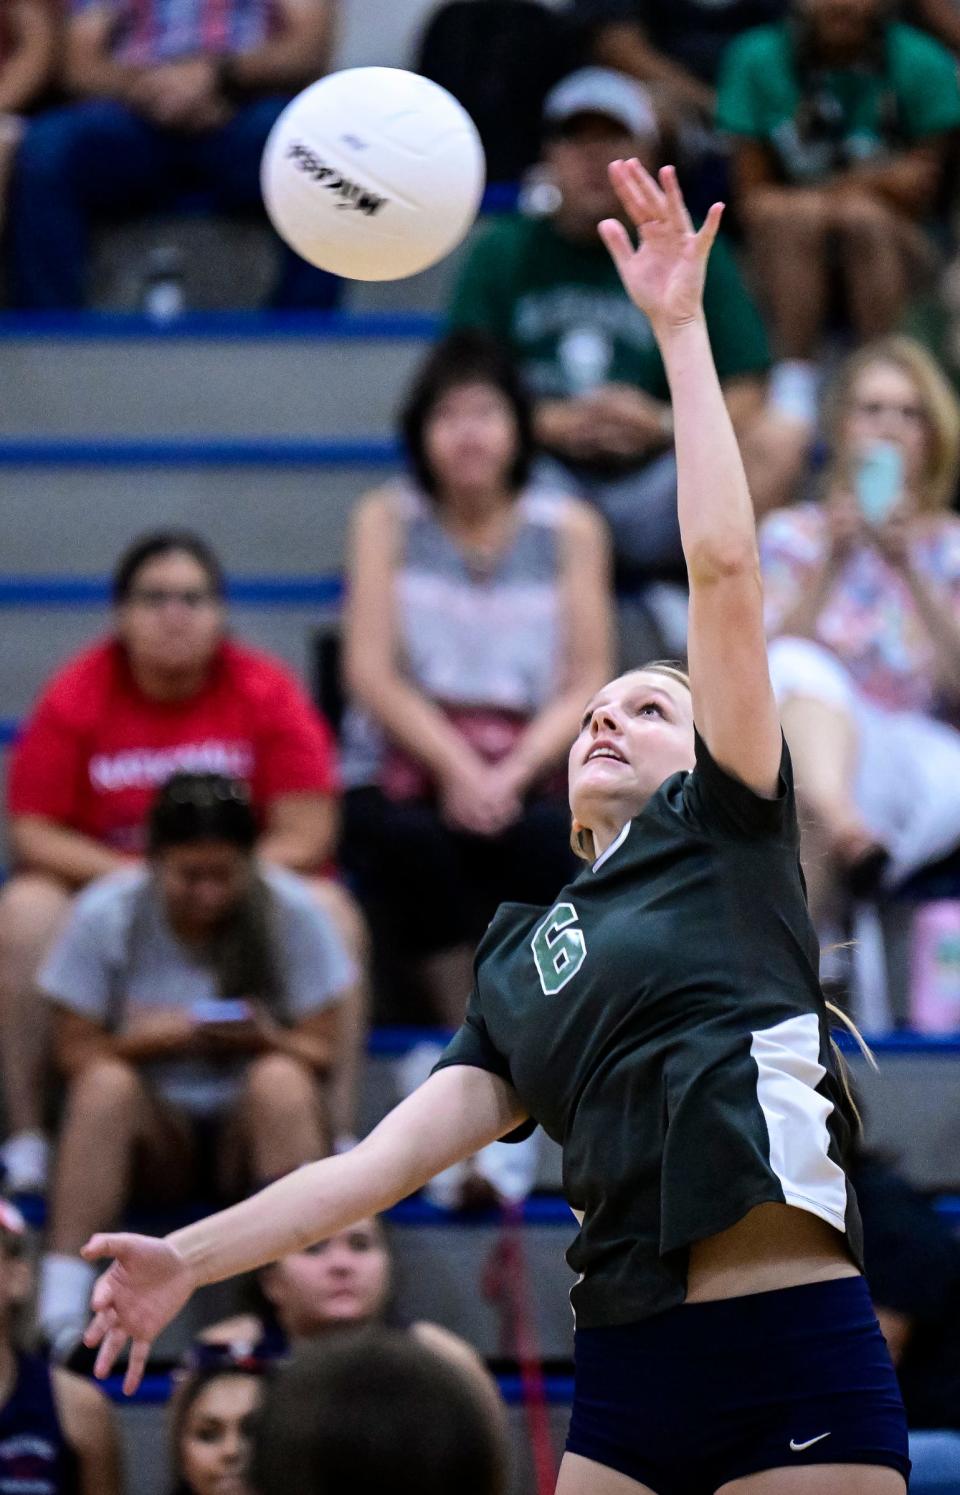 El Diamante's Haley Wells hits against Tulare Western in a non-league high school volleyball match on Tuesday, September 13, 2022. 